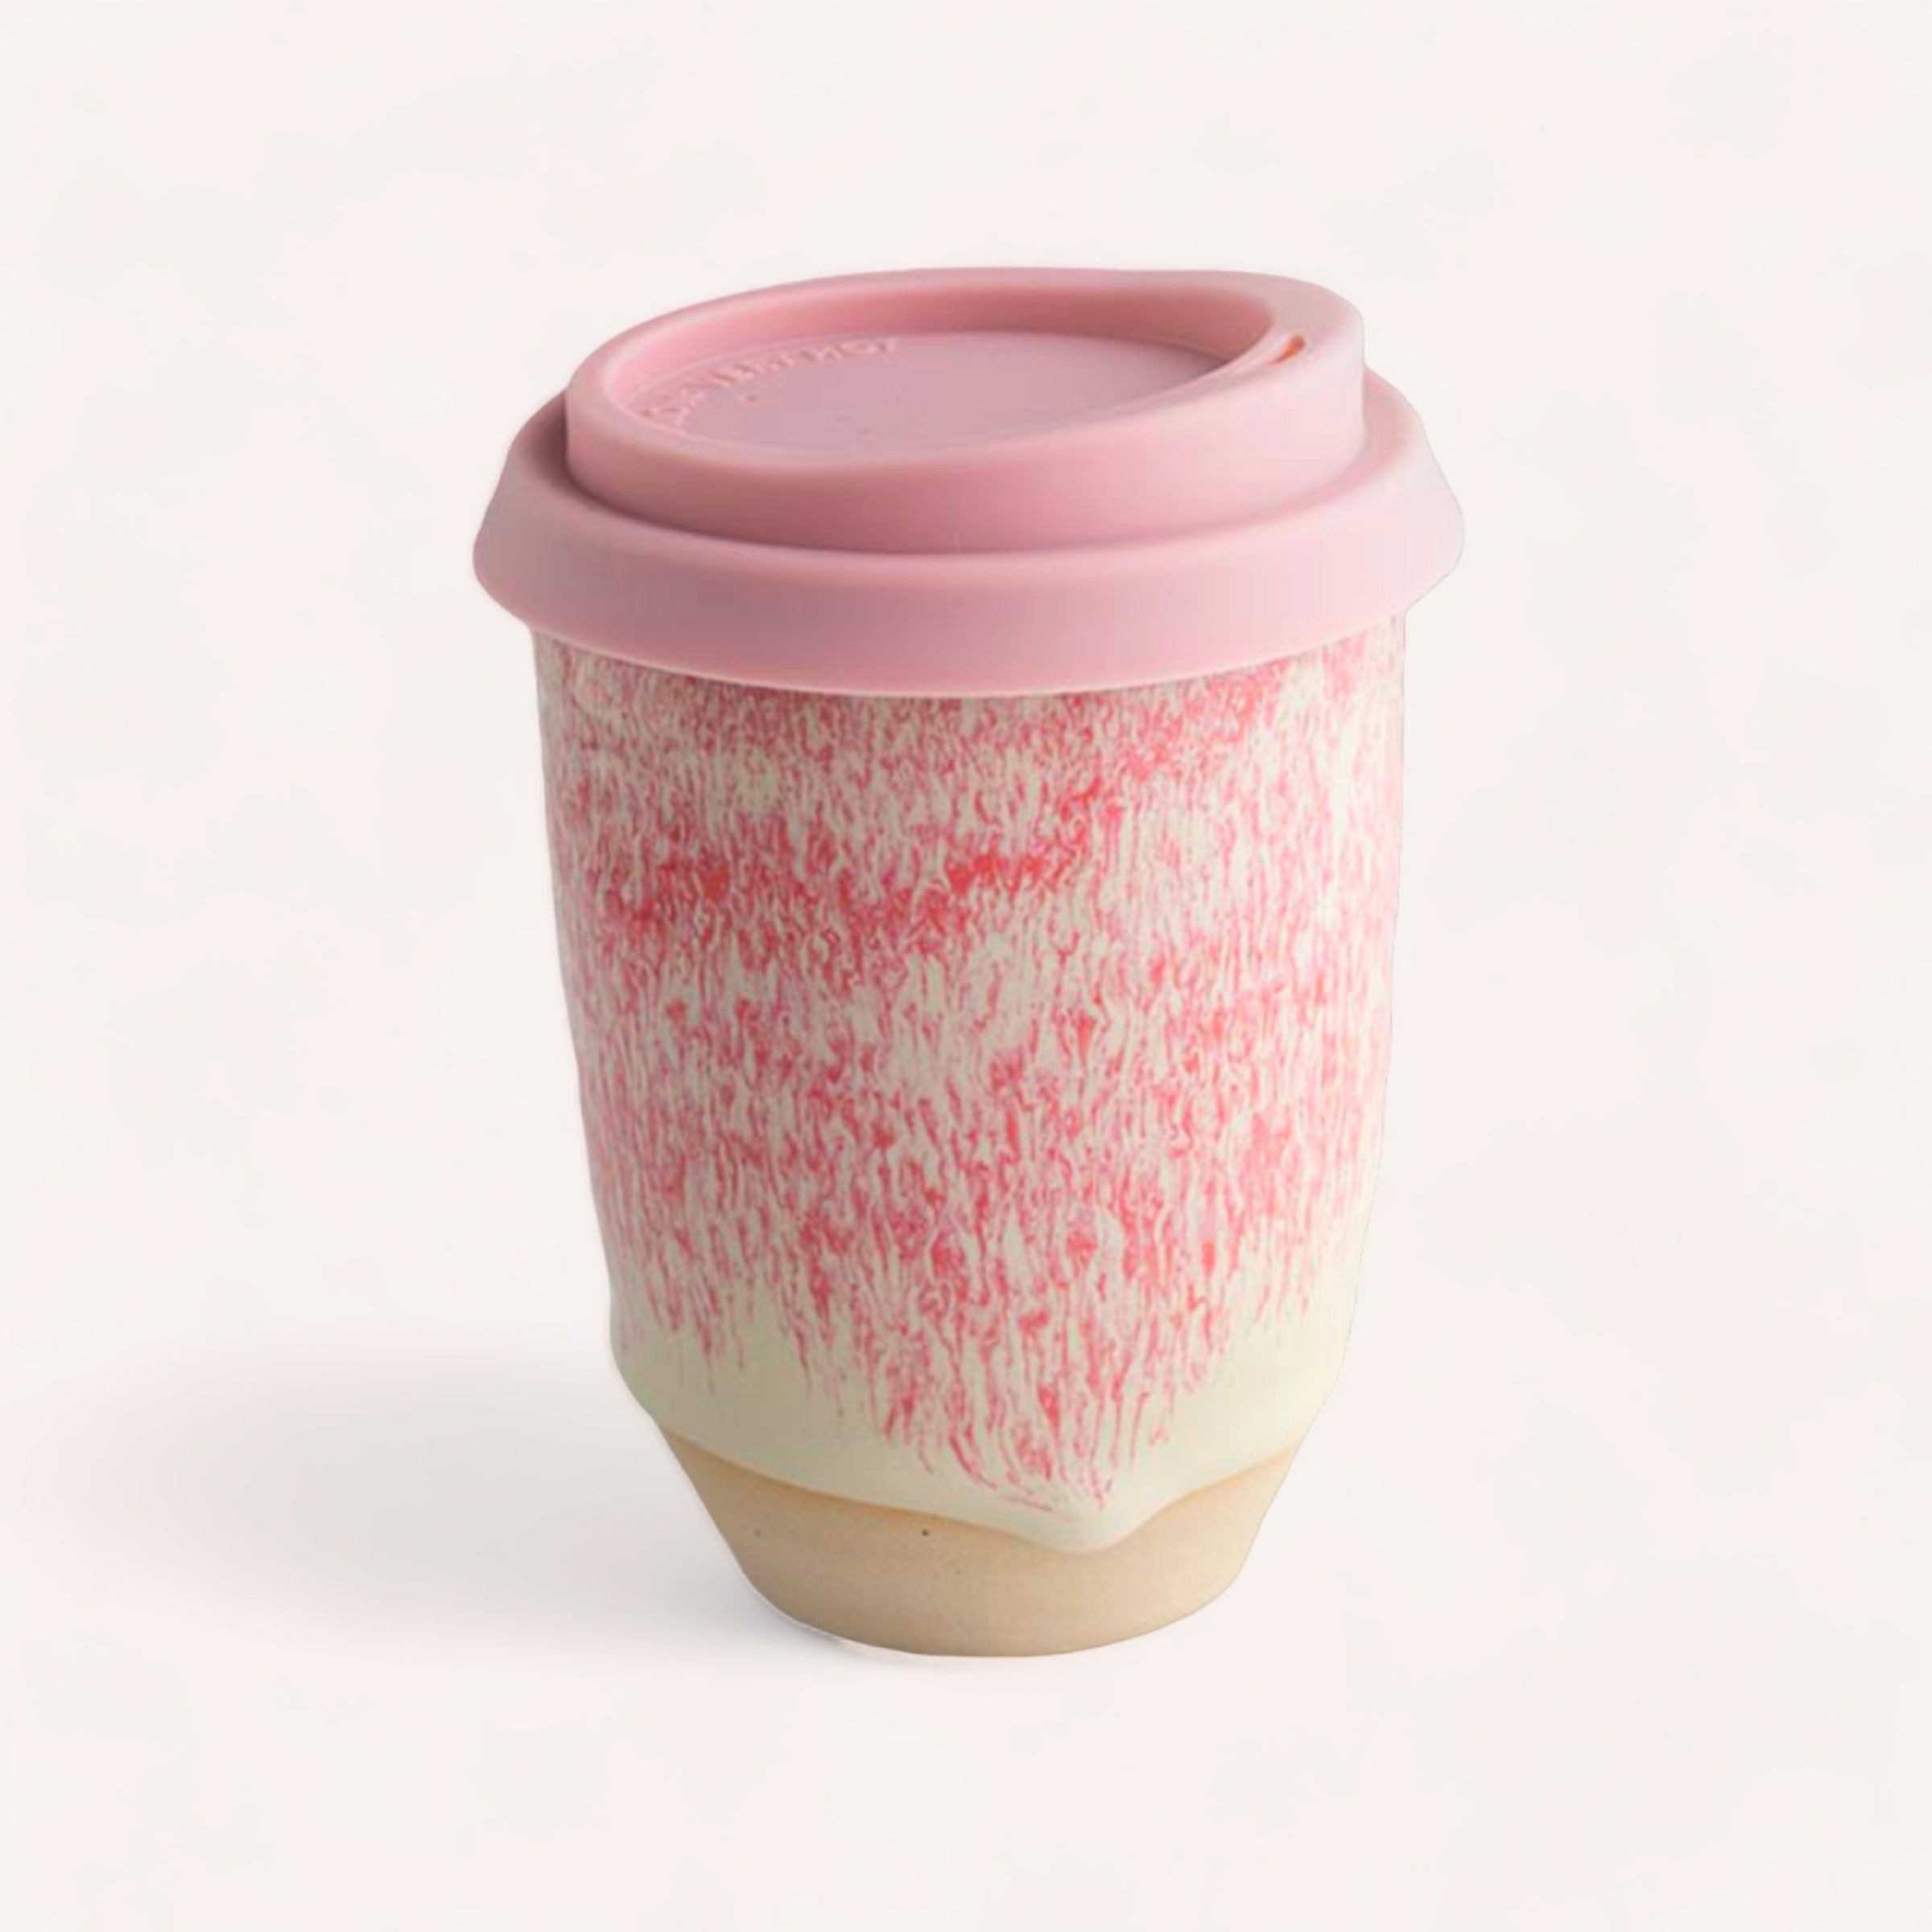 A handcrafted Ceramic Keep Cup by Sam Mayell, made from NZ sourced stoneware, featuring a unique pink textured design and a matching lid against a white background.